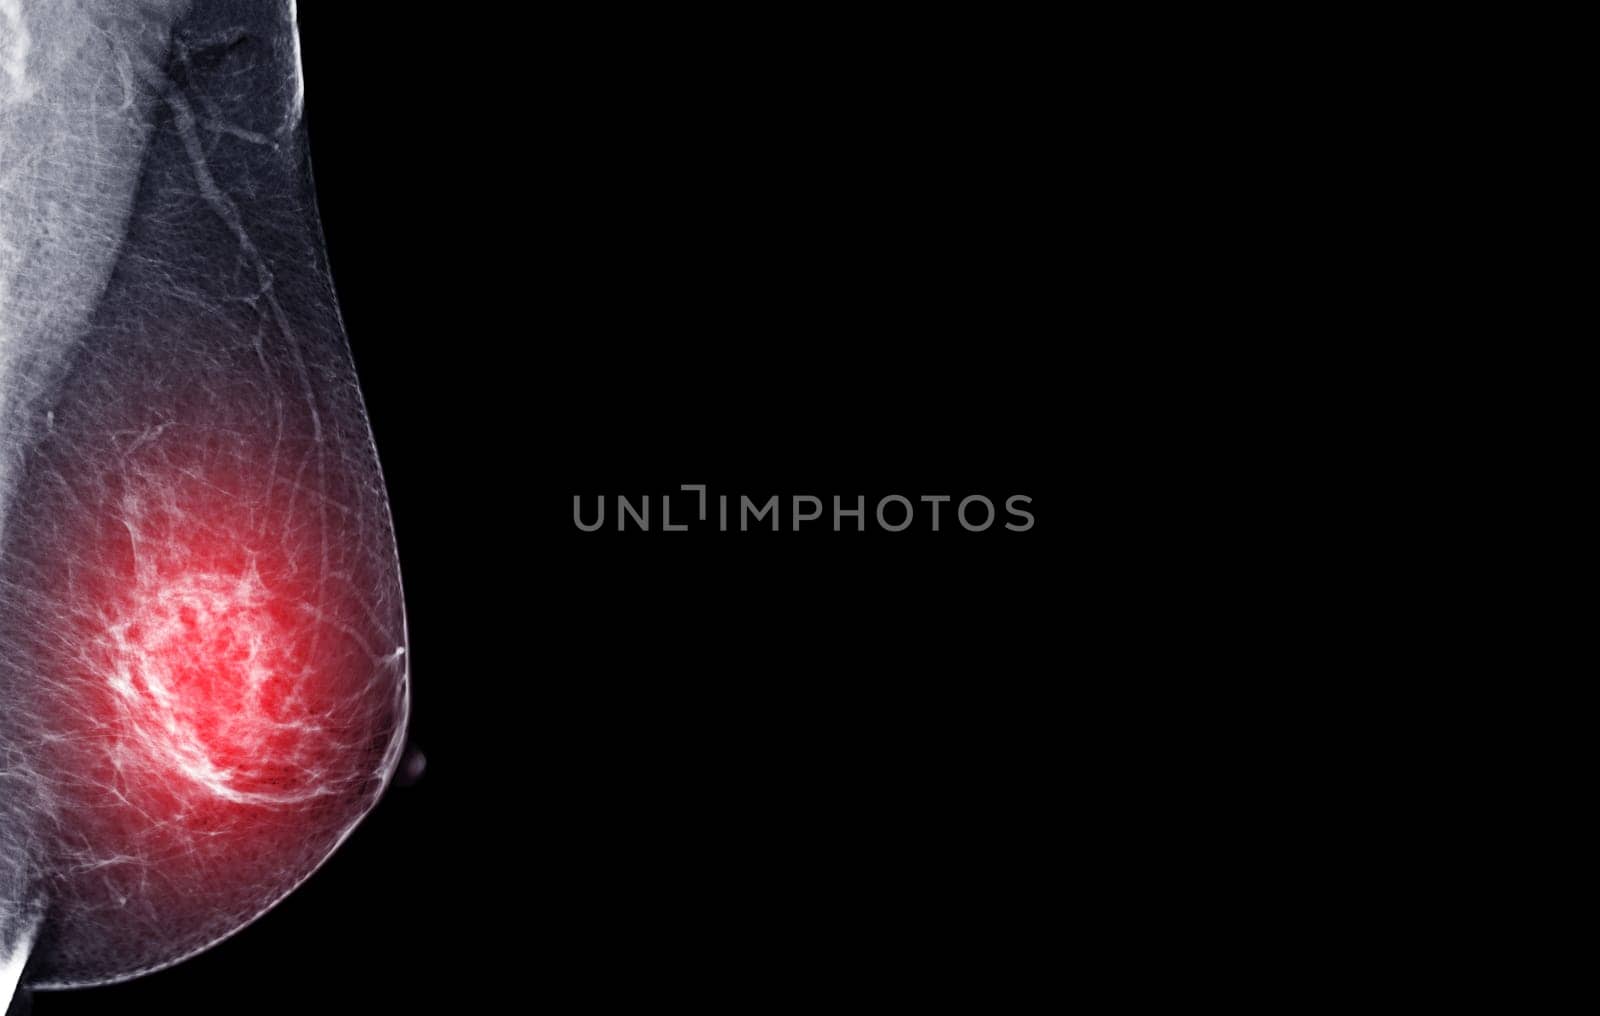  X-ray Digital Mammogram of Right  side  MLO view .  by samunella